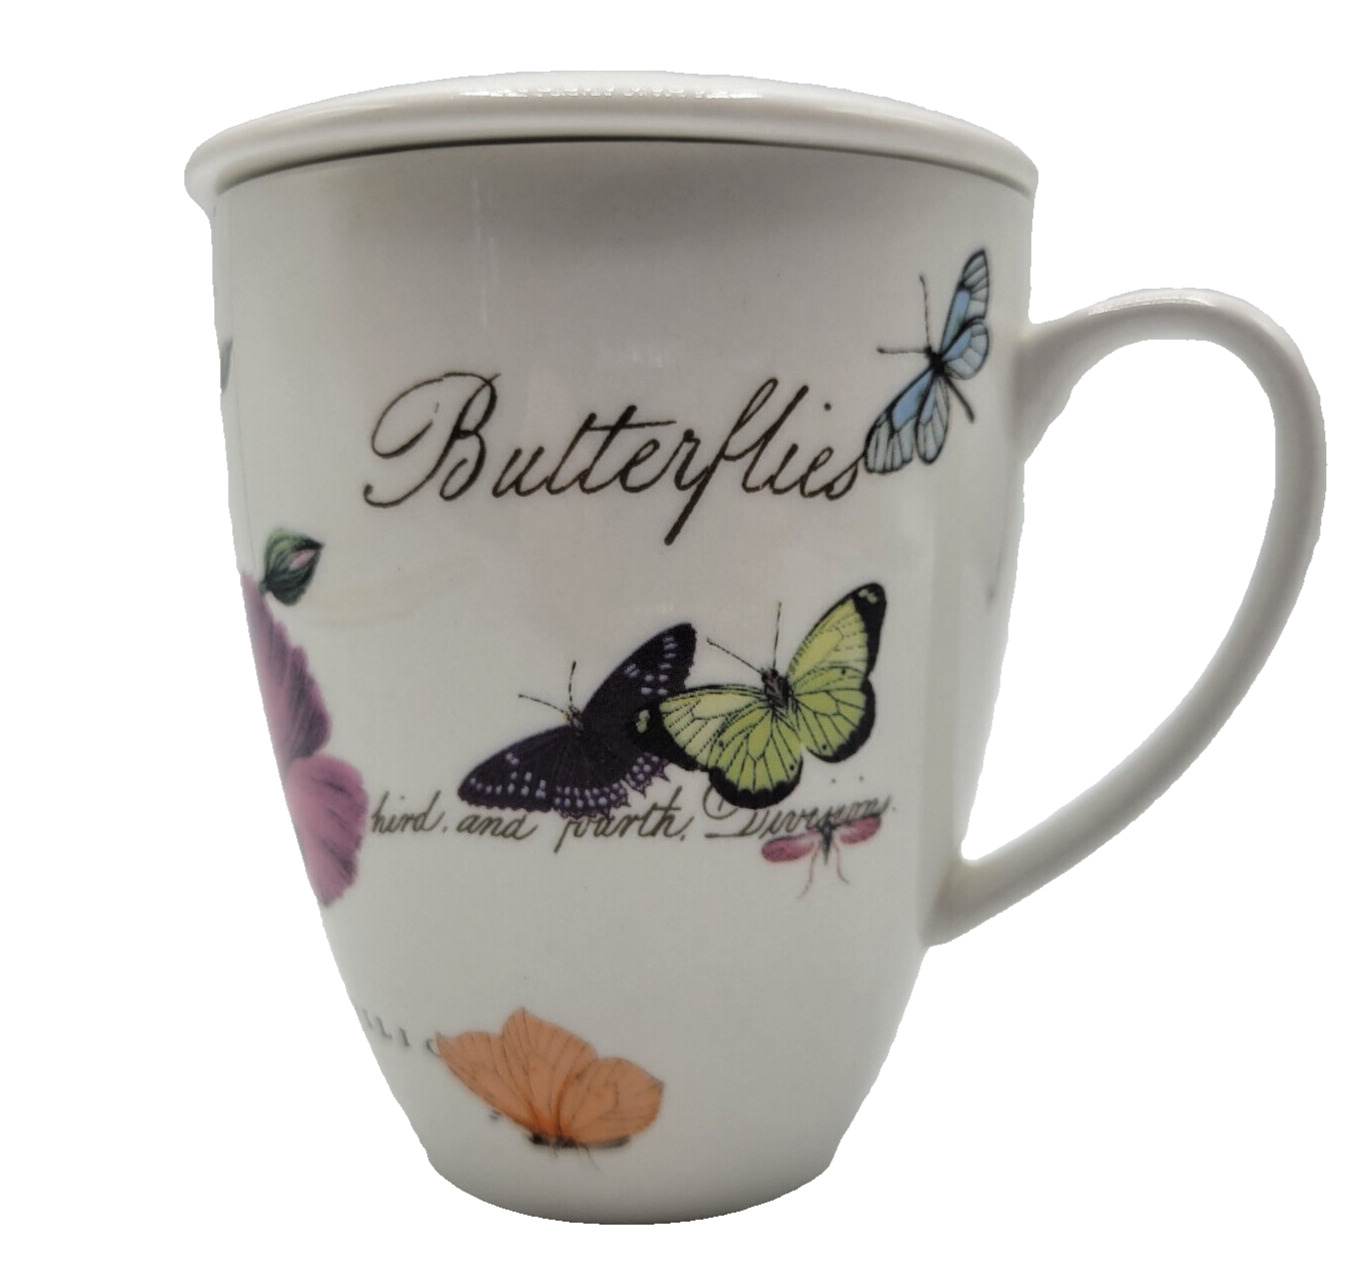 Butterflies Papillons Exotiques Porcelain Coffee Tea Mug Cup with Cover Lid